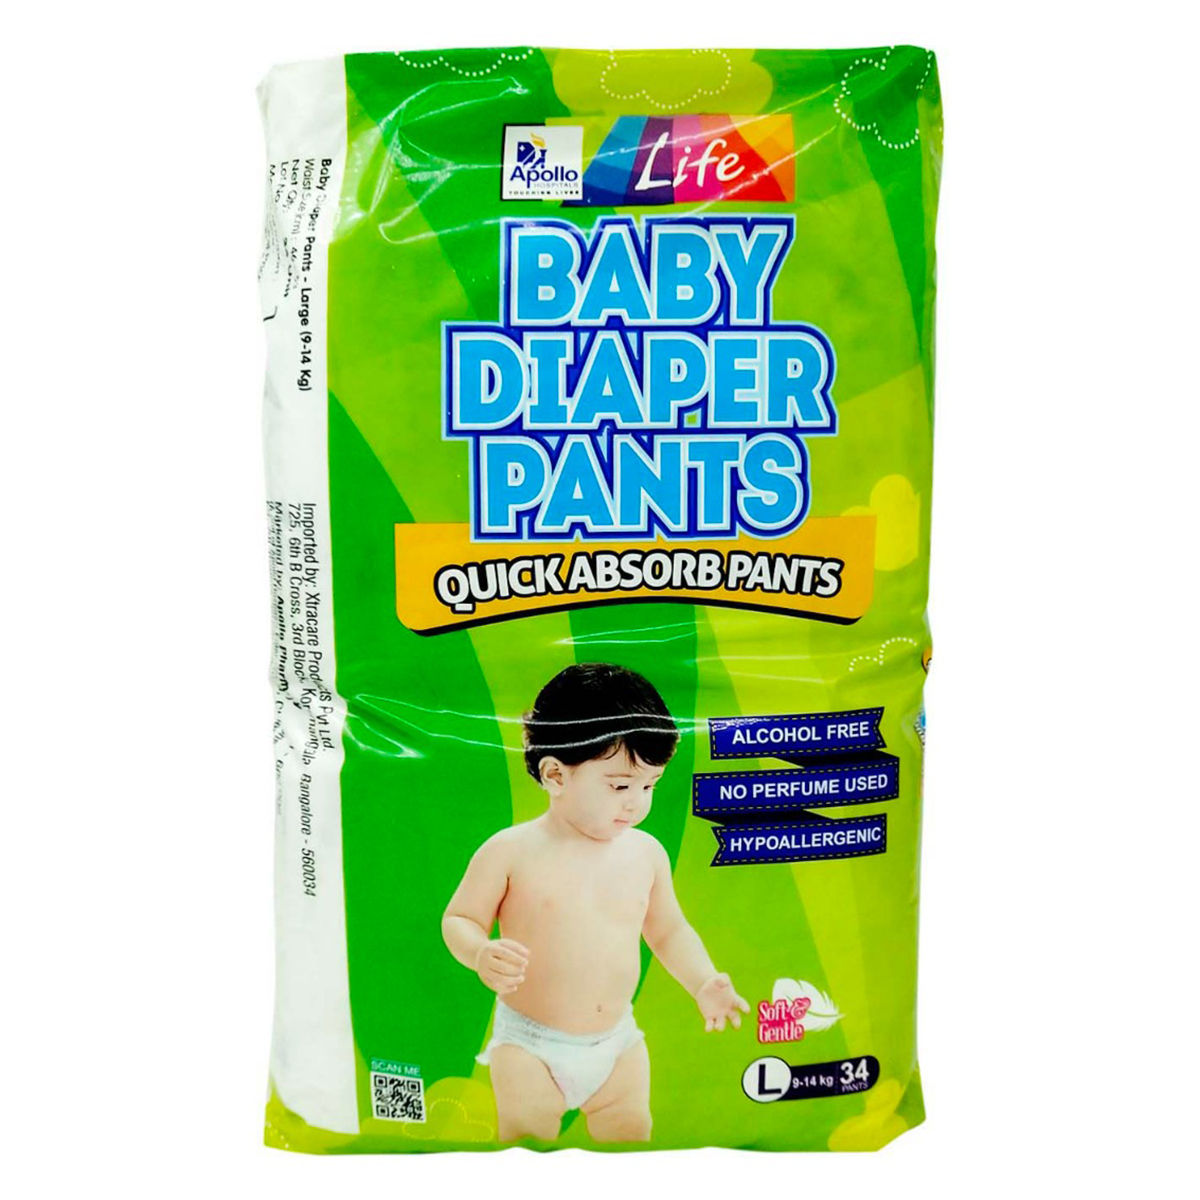 Pampers All round Protection Pants, Large size baby Diapers, (L) 23 Count  Lotion with Aloe Vera